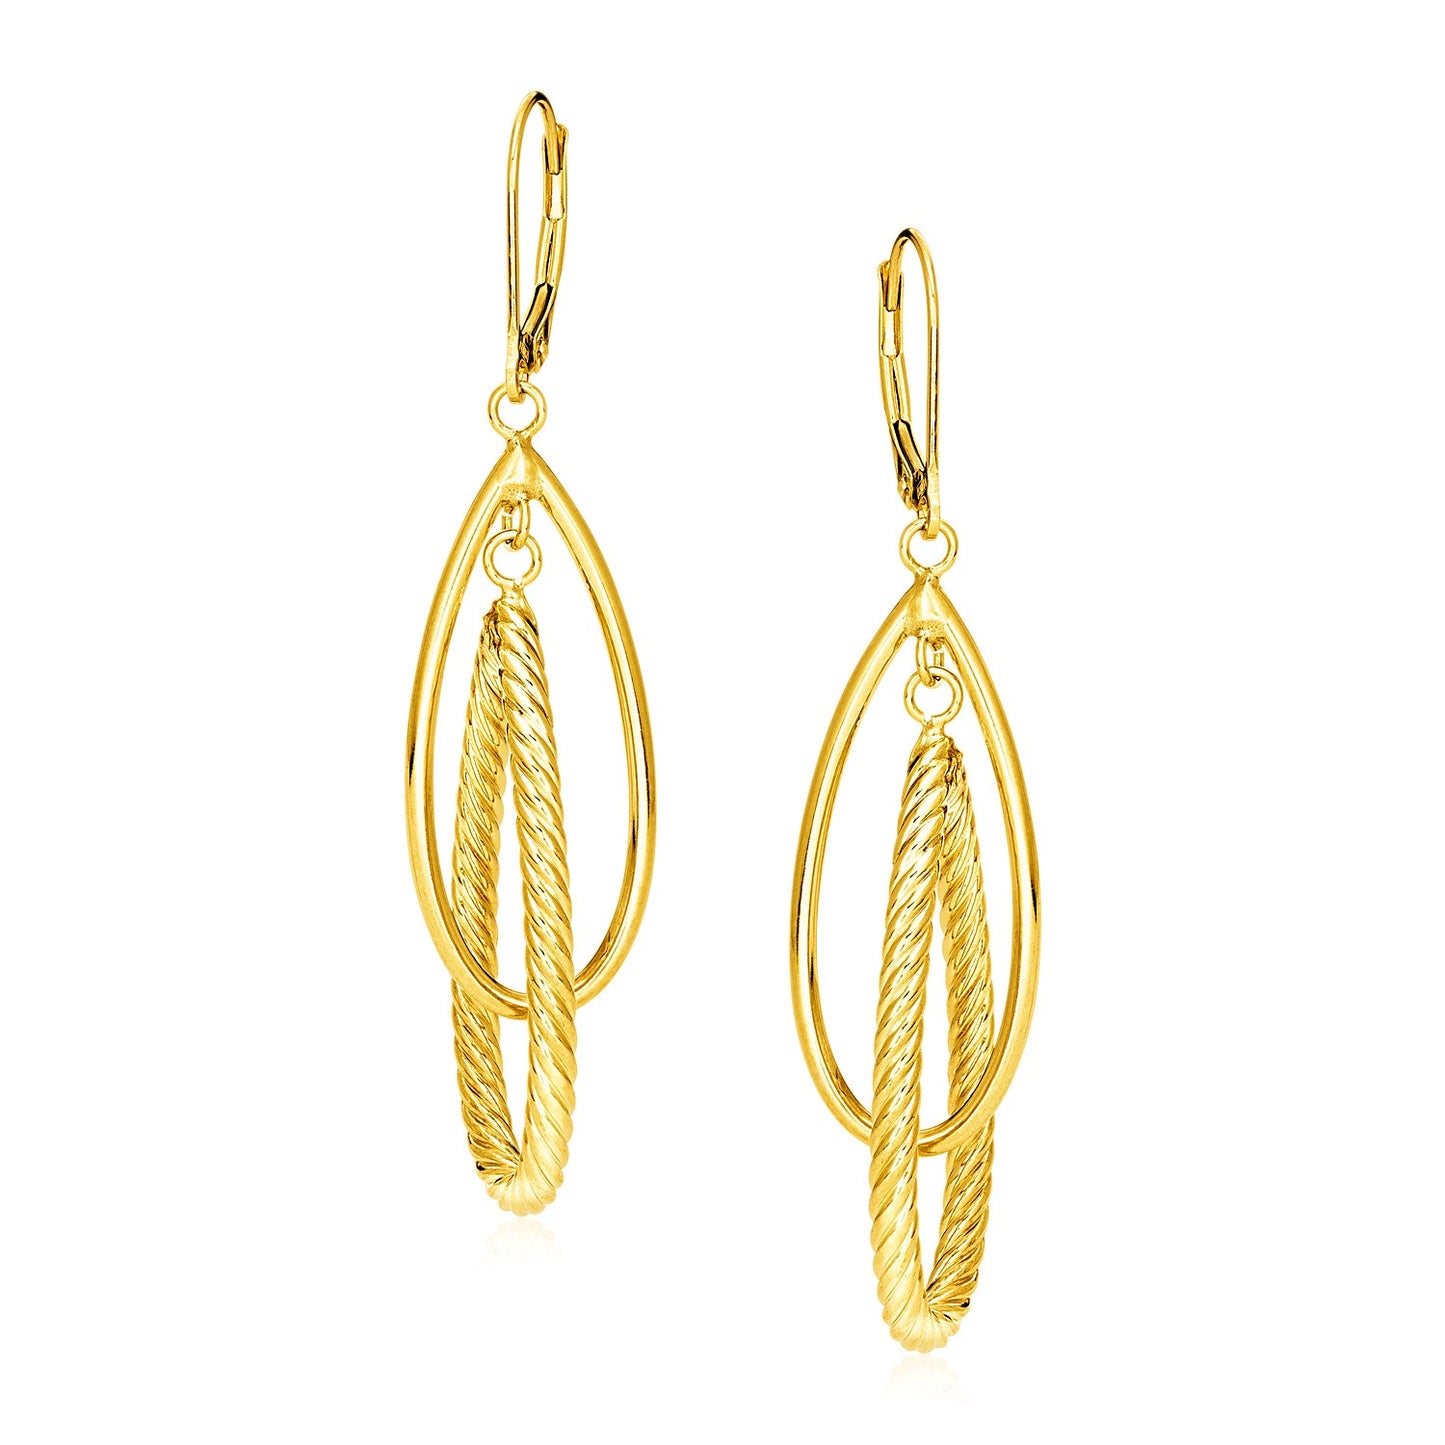 14k Yellow Gold Earrings with Shiny and Textured Teardrop Dangles